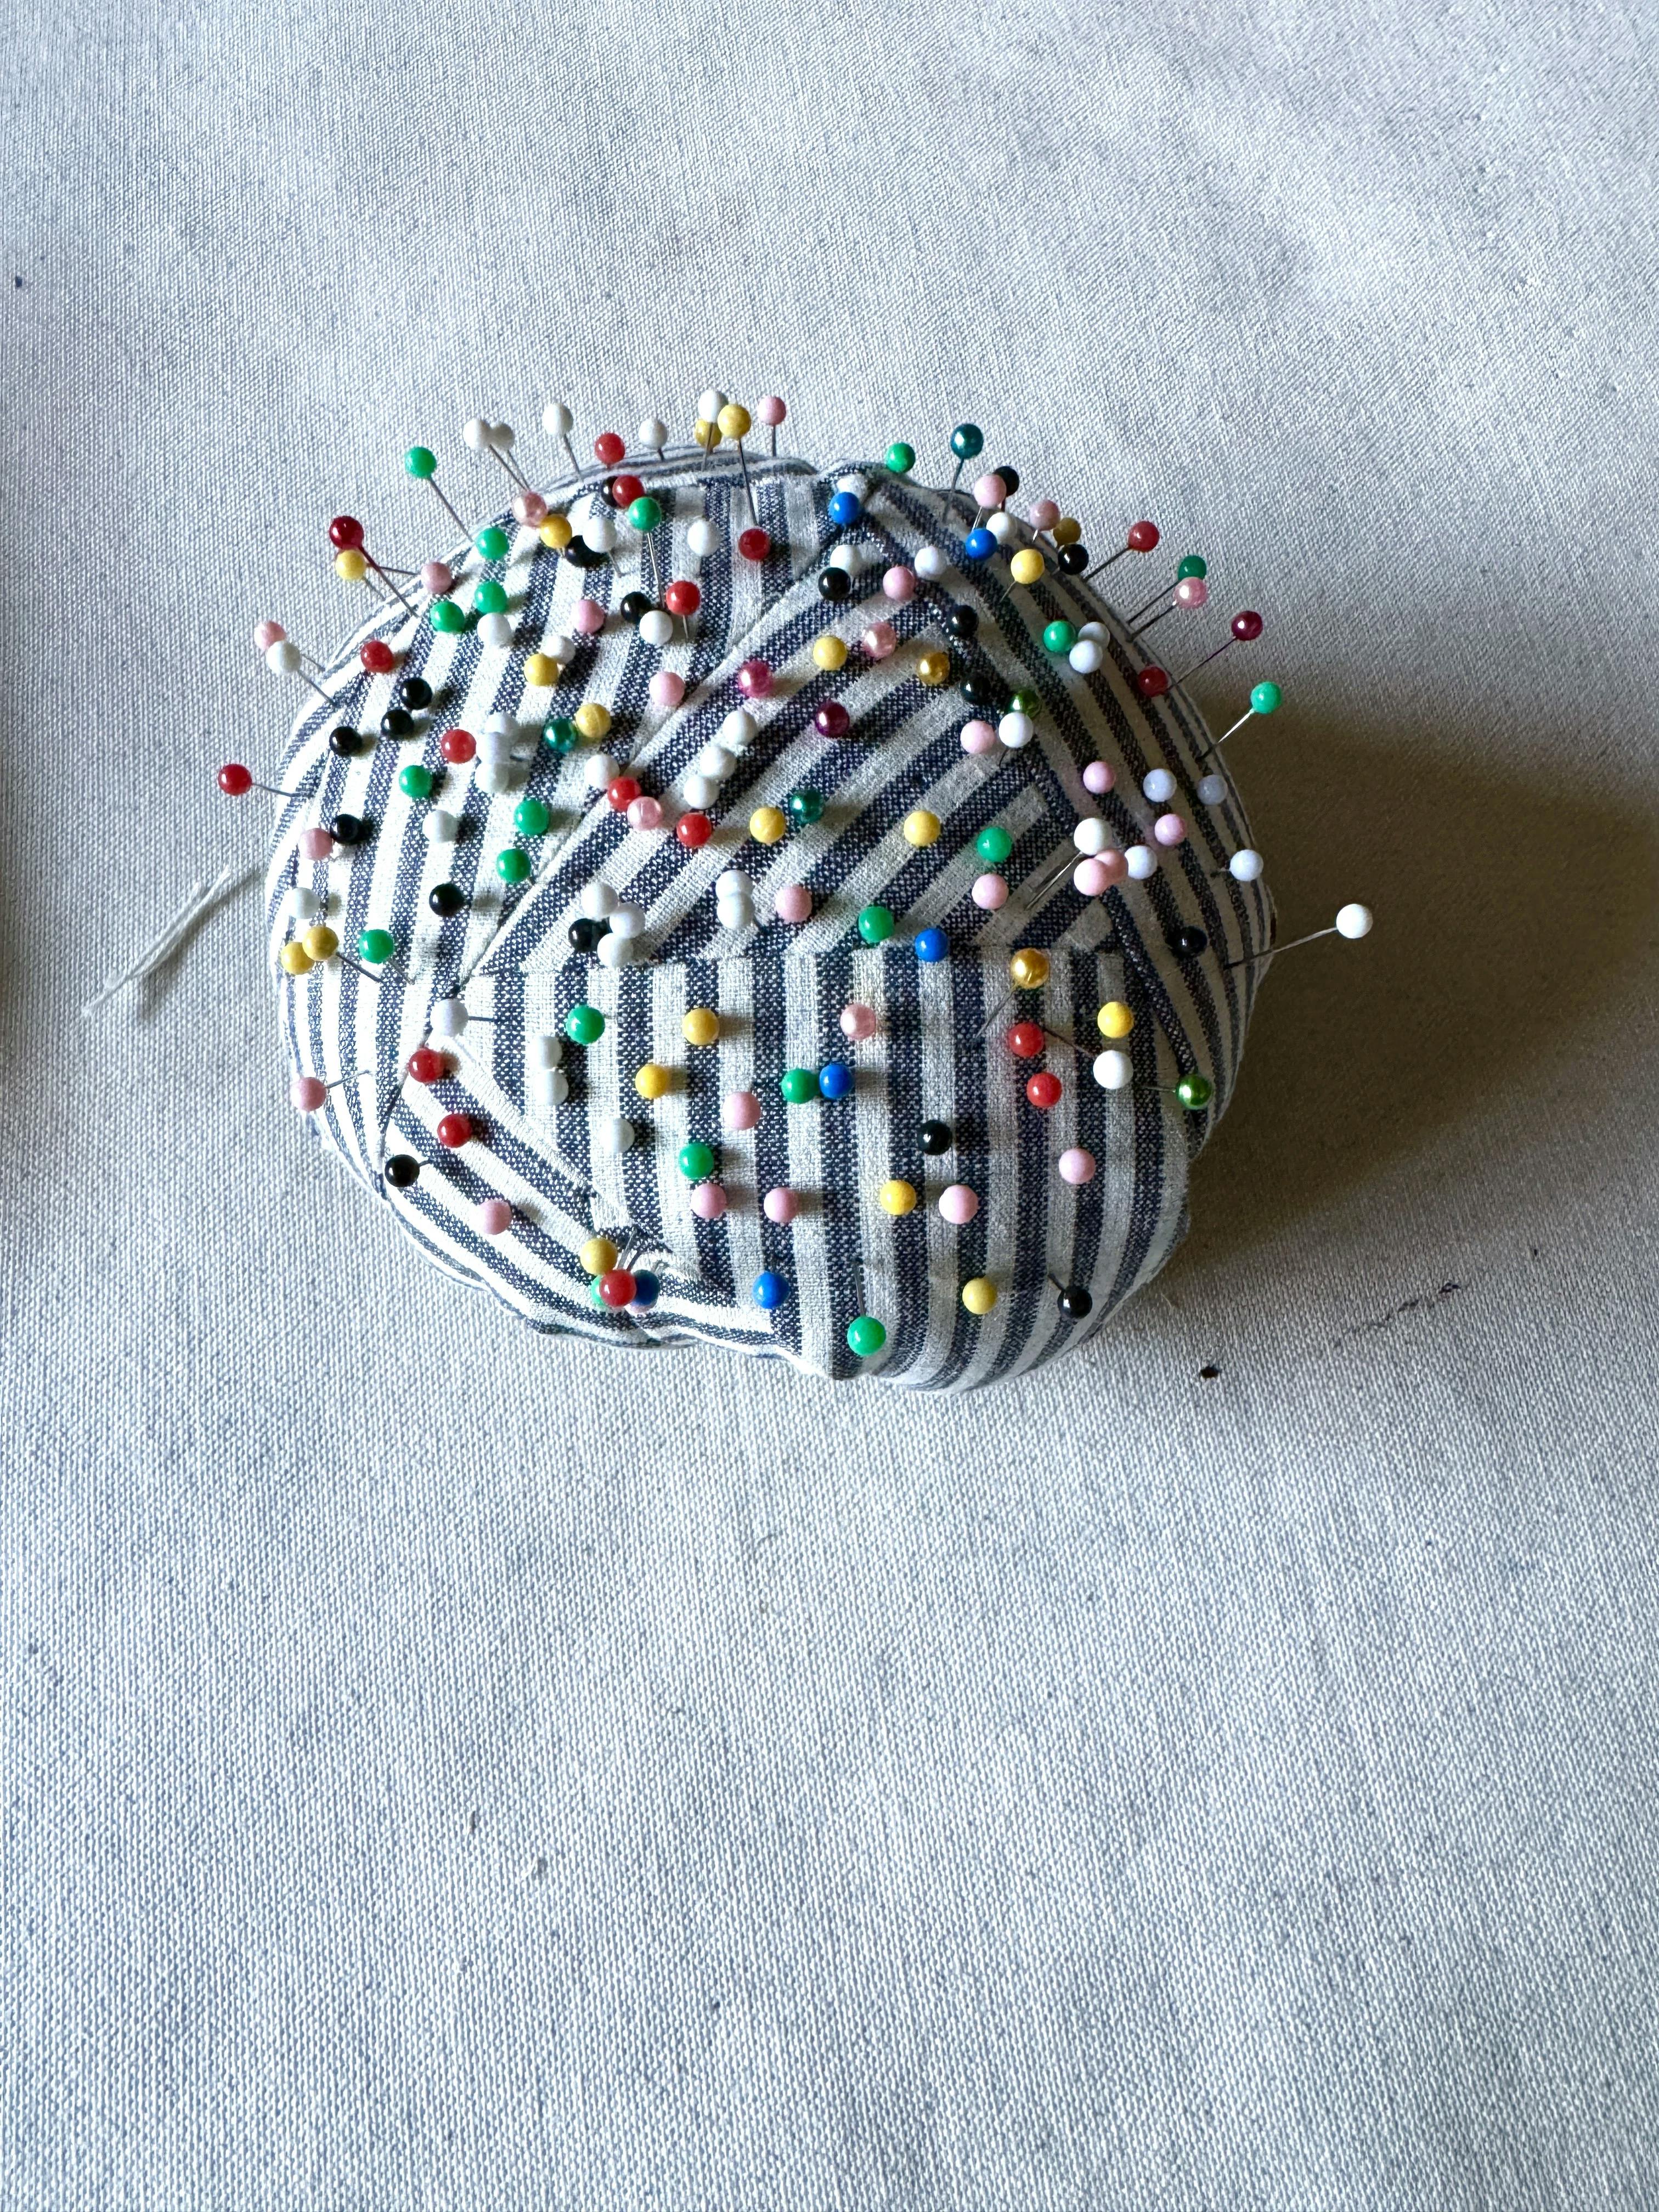 Pins in a pincushion in Carrie Crawford's studio. 